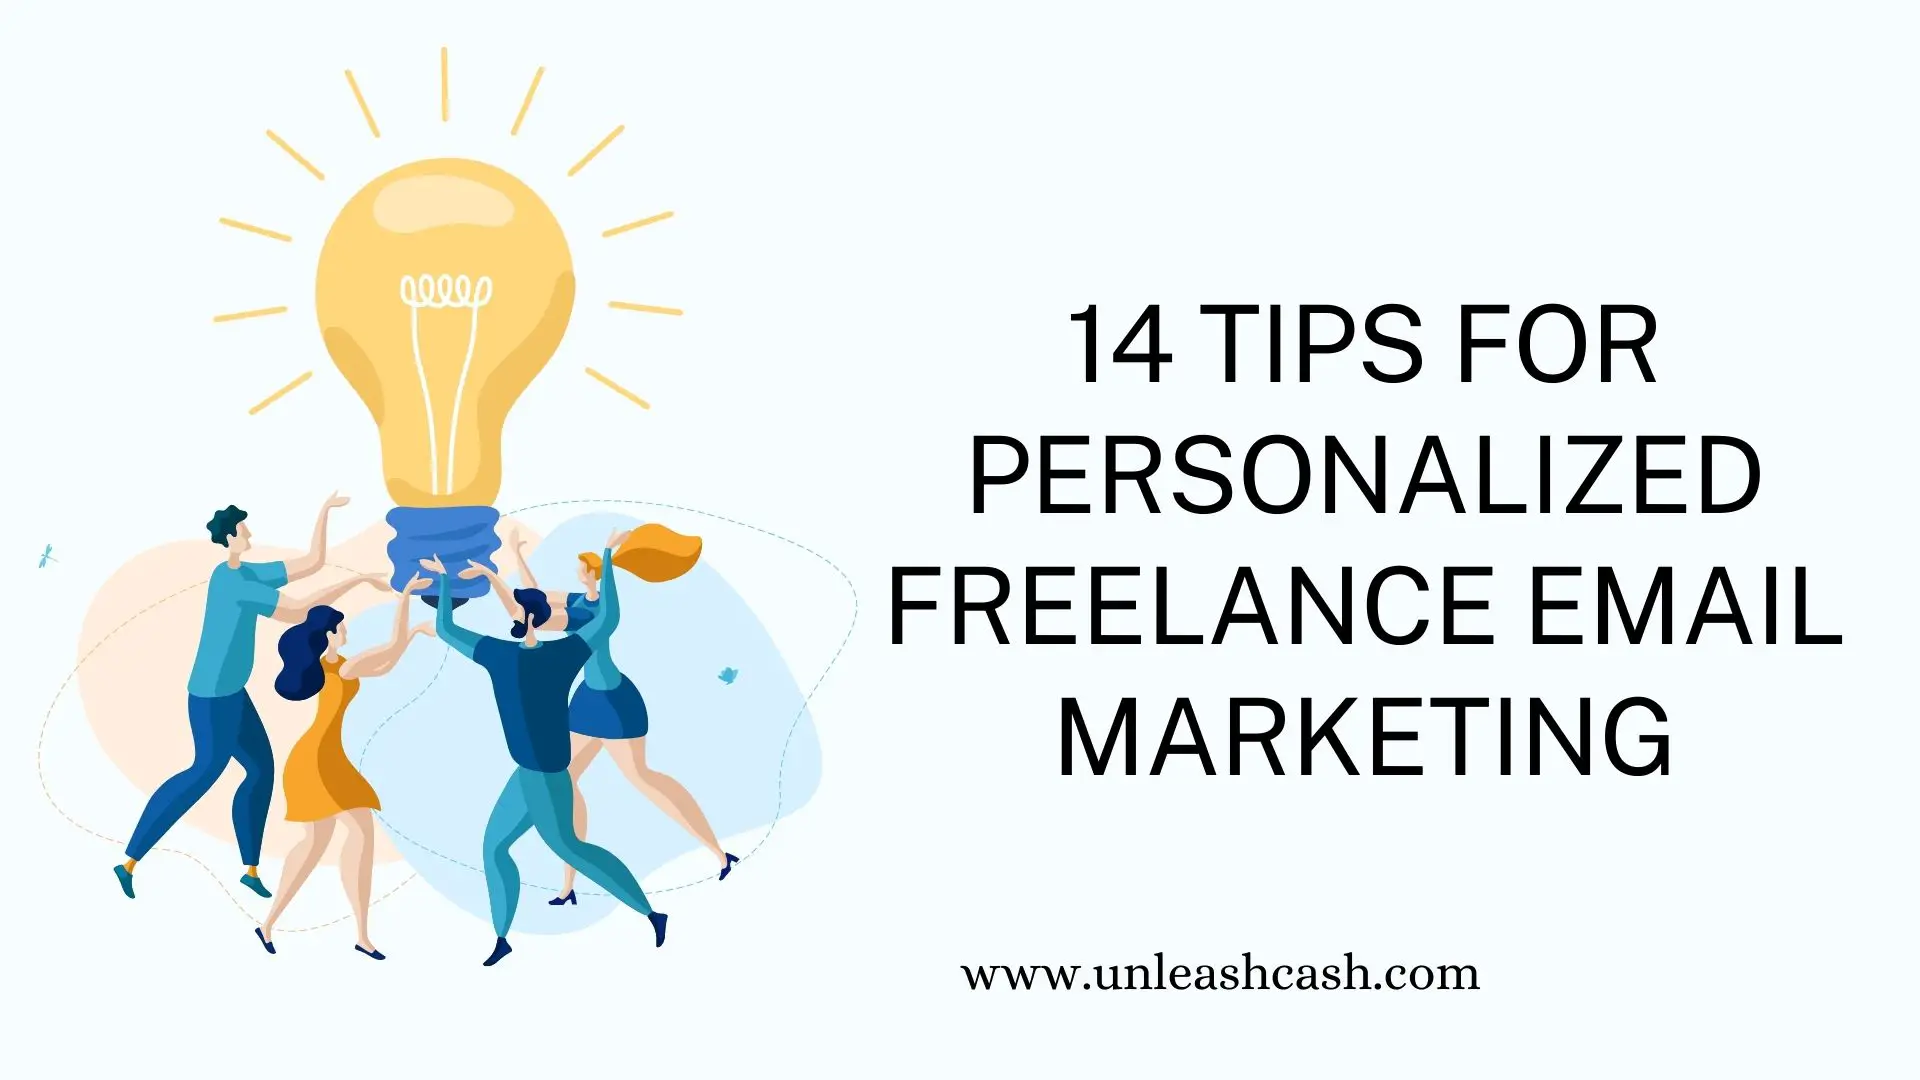 14 Tips For Personalized Freelance Email Marketing